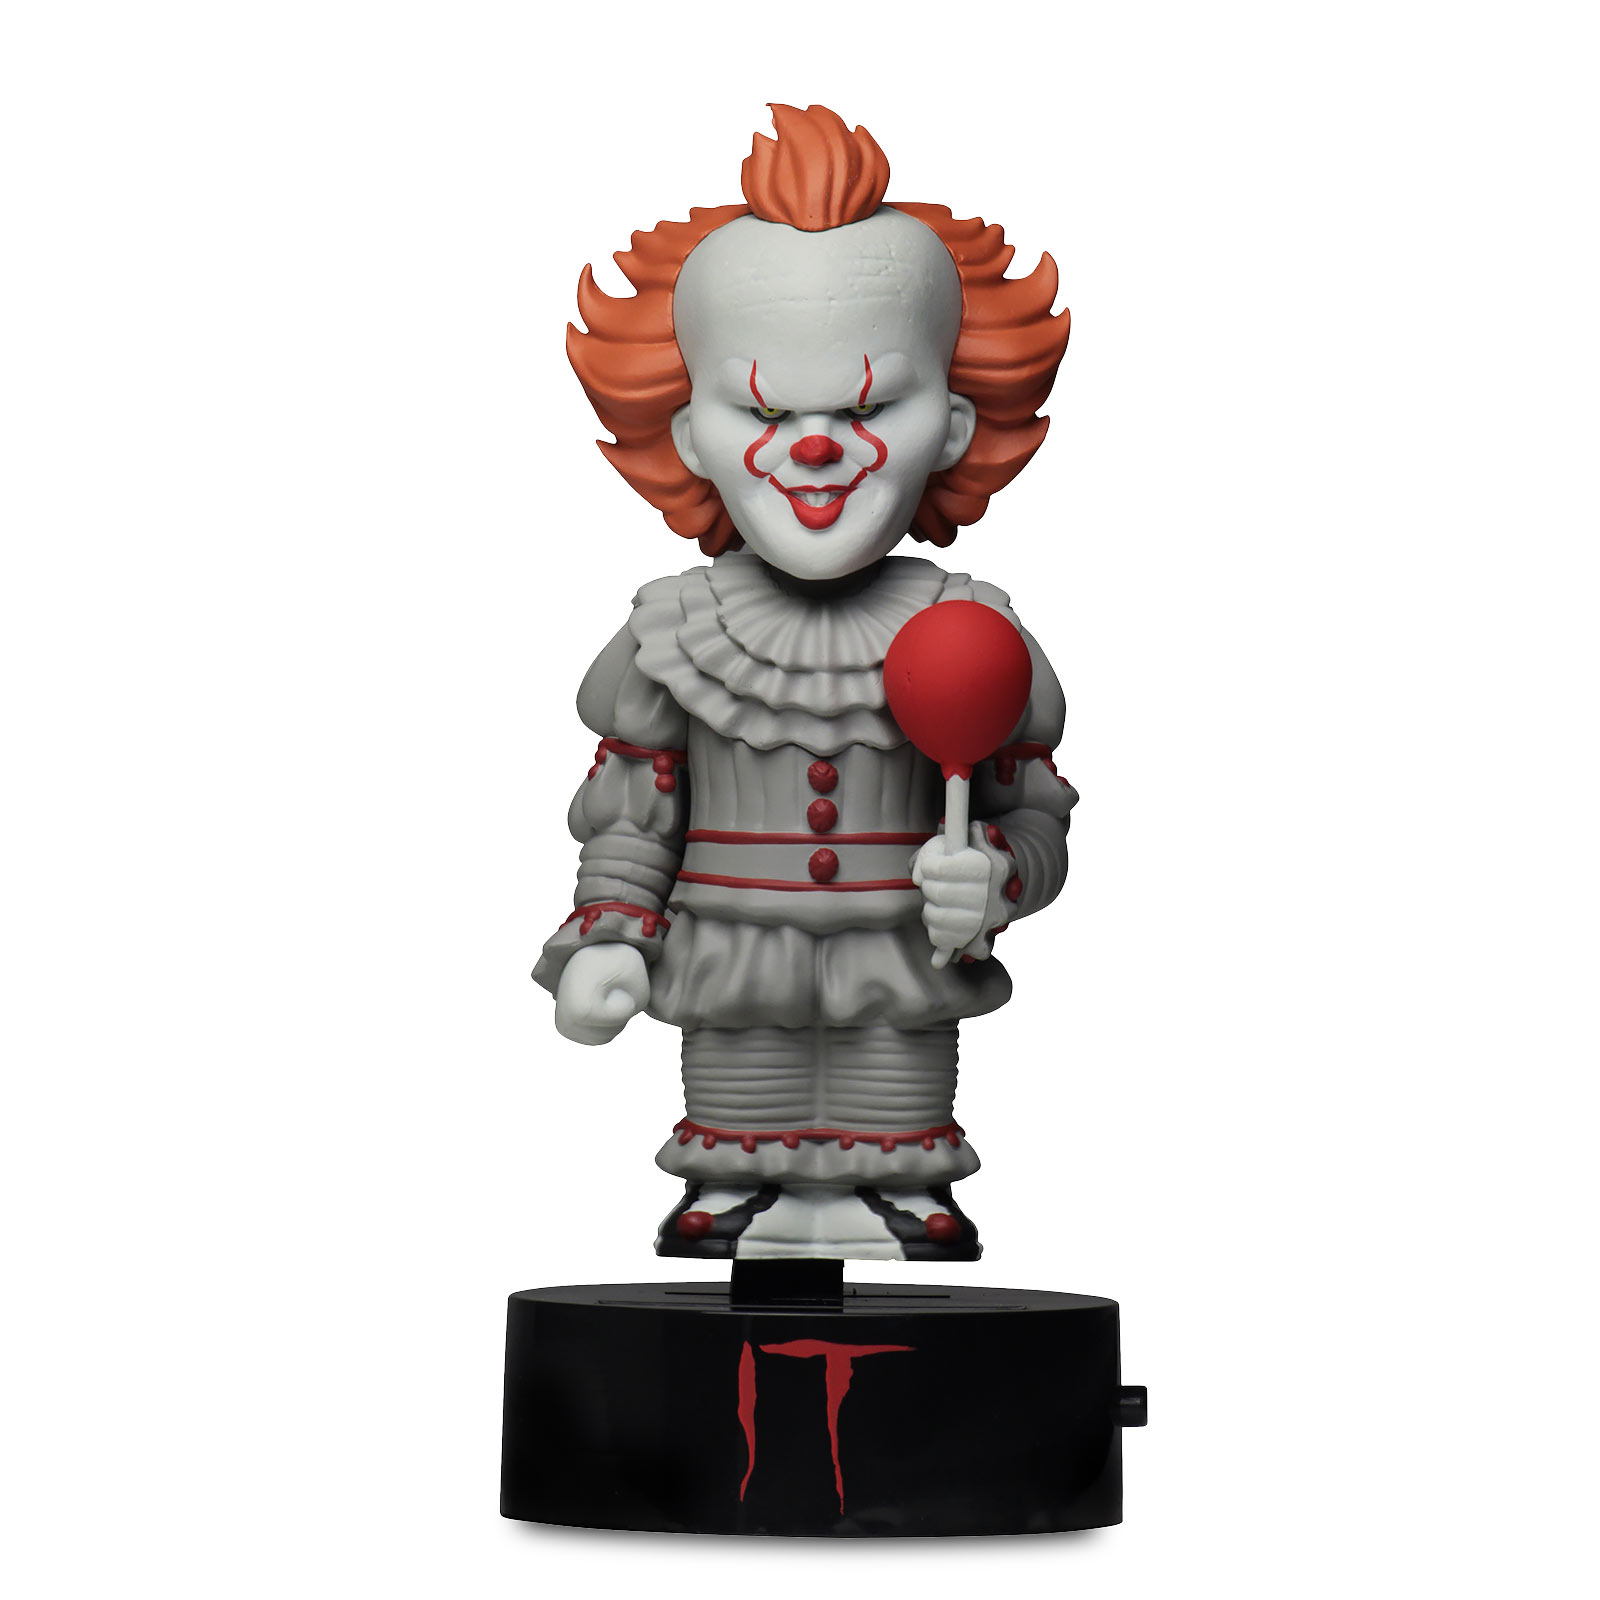 Stephen King's IT - Pennywise Body Knockers Zonnebobblehead